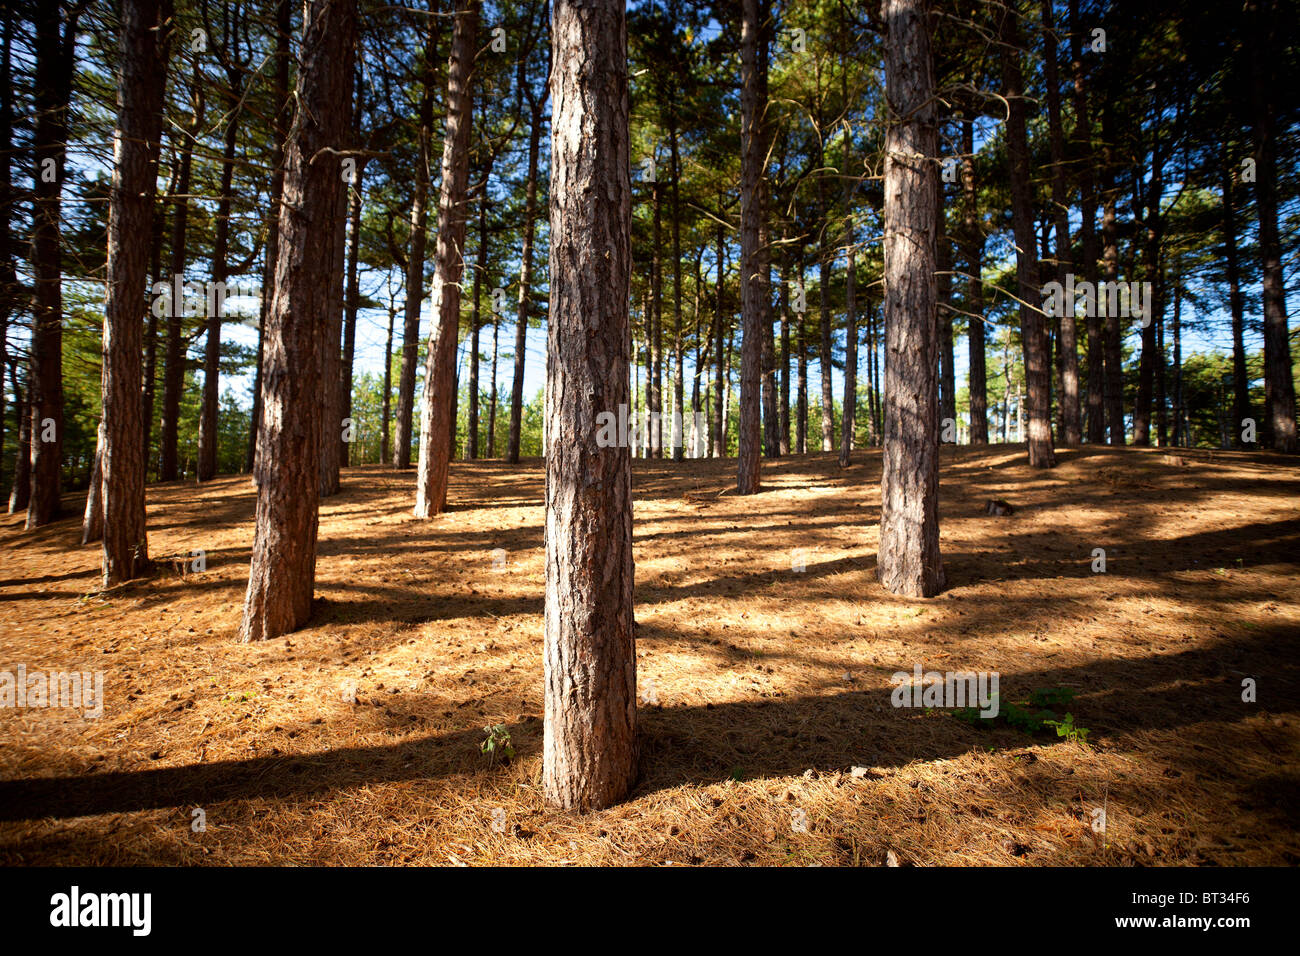 The pine woodland at Formby Point, managed by the National Trust is one of the national strongholds for the Red Squirrel and is identified as a refuge Stock Photo